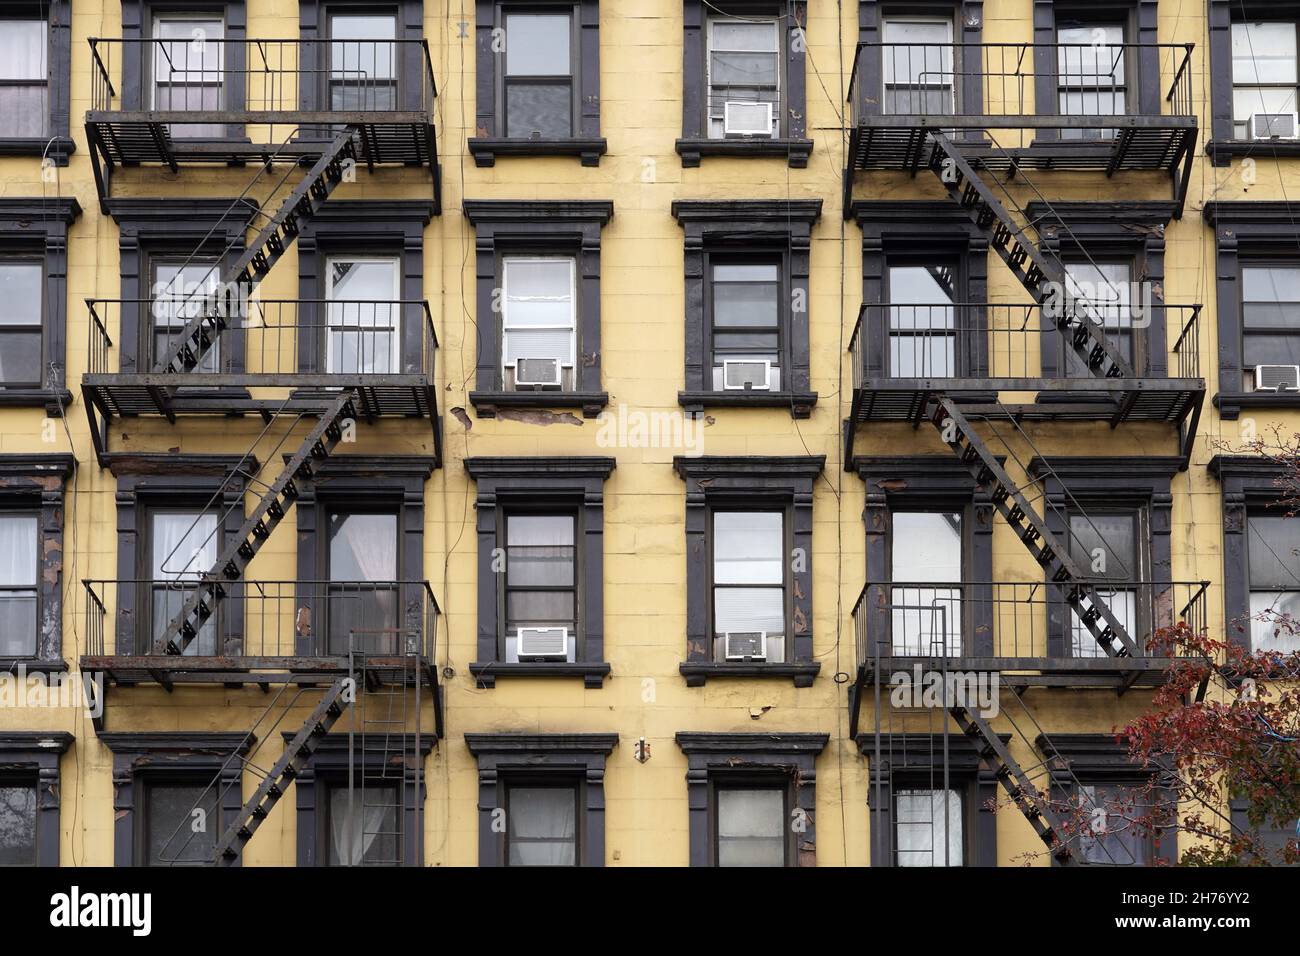 Colorful, Old fashioned Manhattan apartment building facades with external fire escape ladders Stock Photo